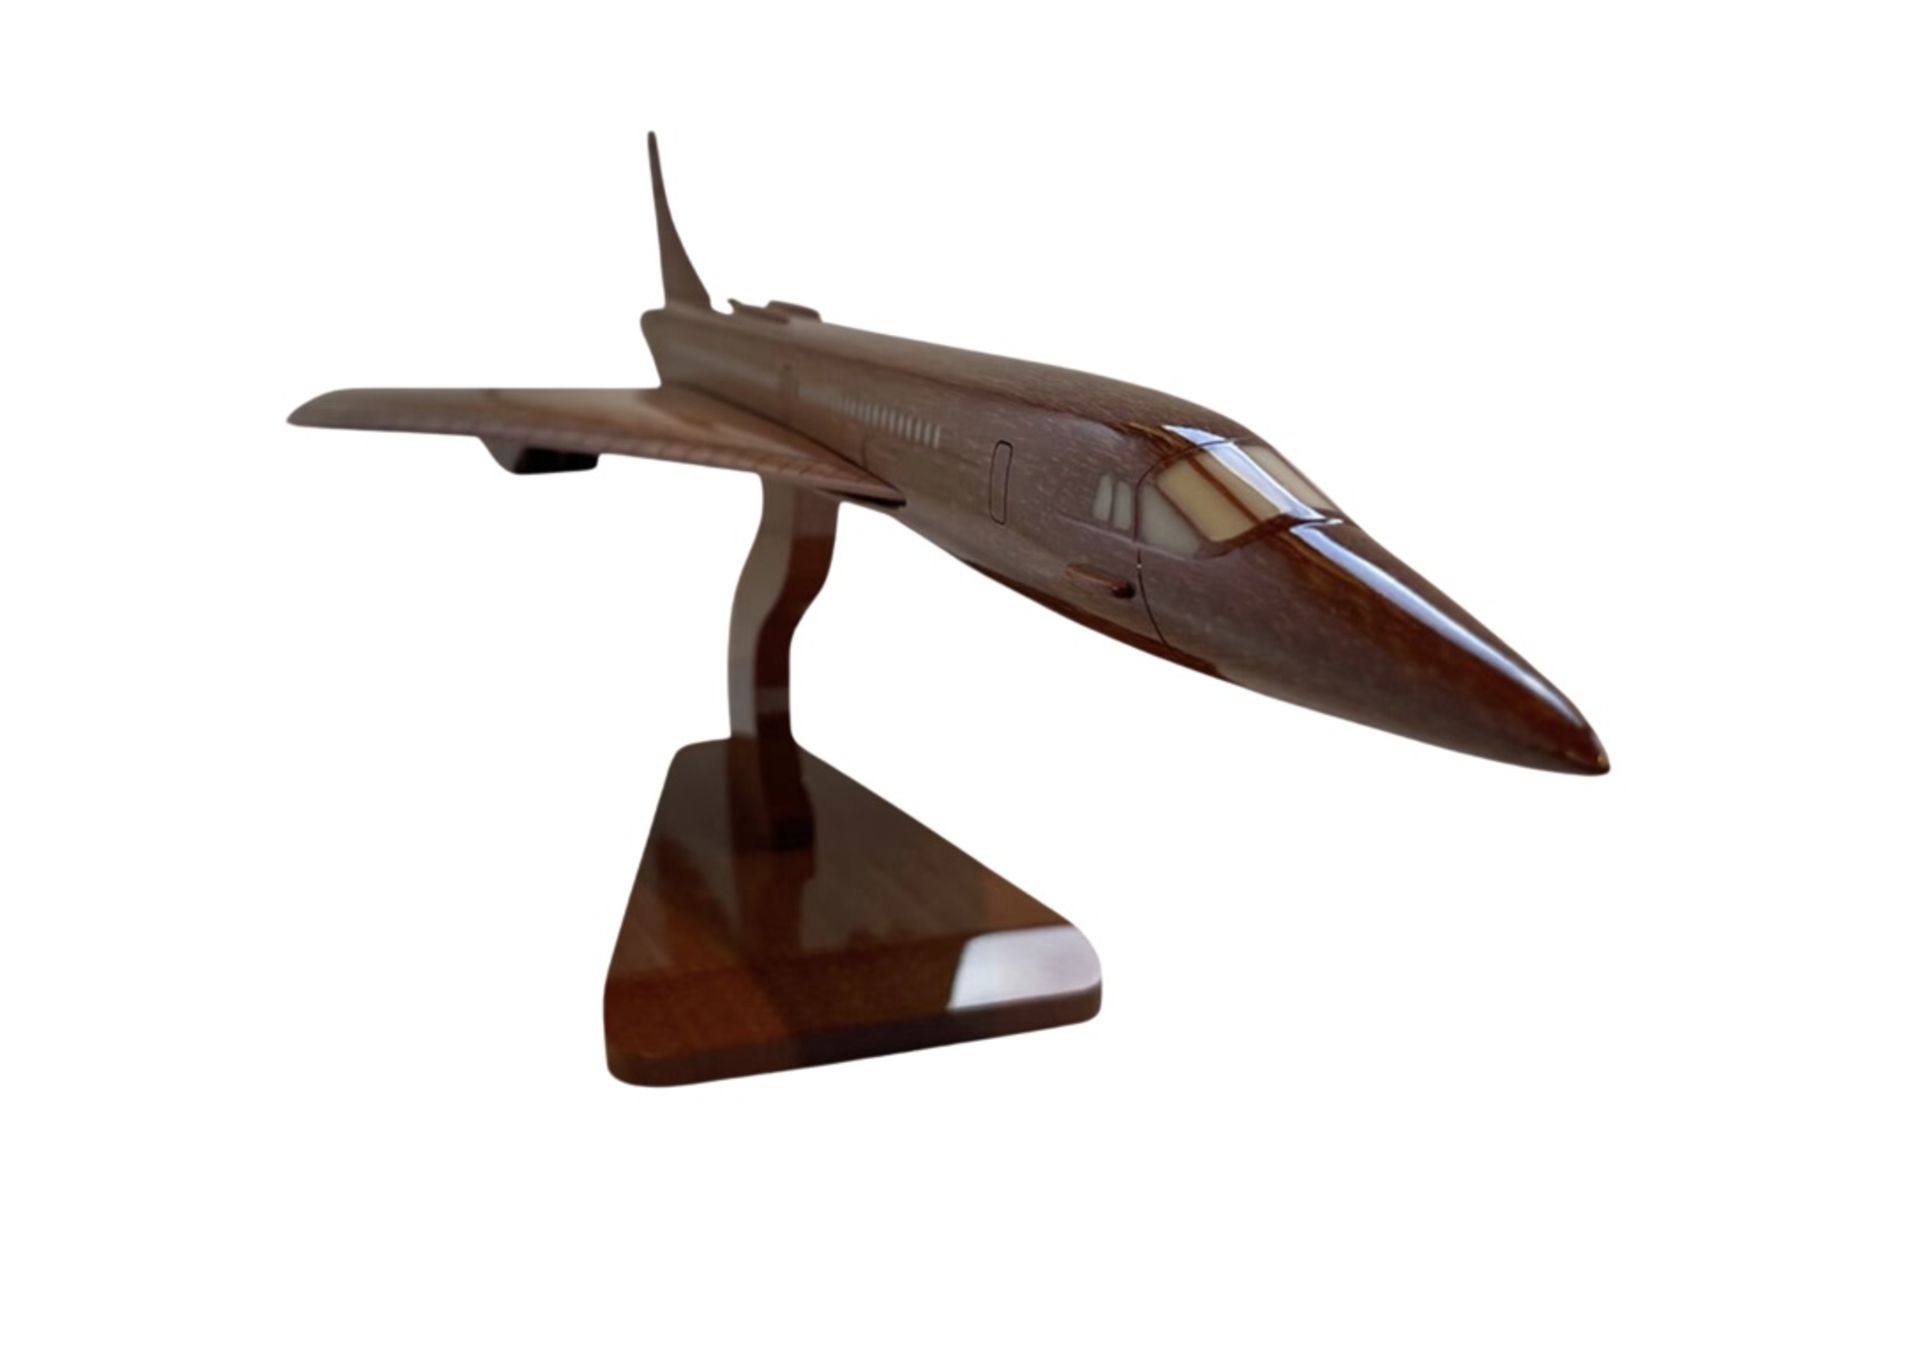 Concorde Wooden Scale Aircraft Display Model - Image 2 of 7